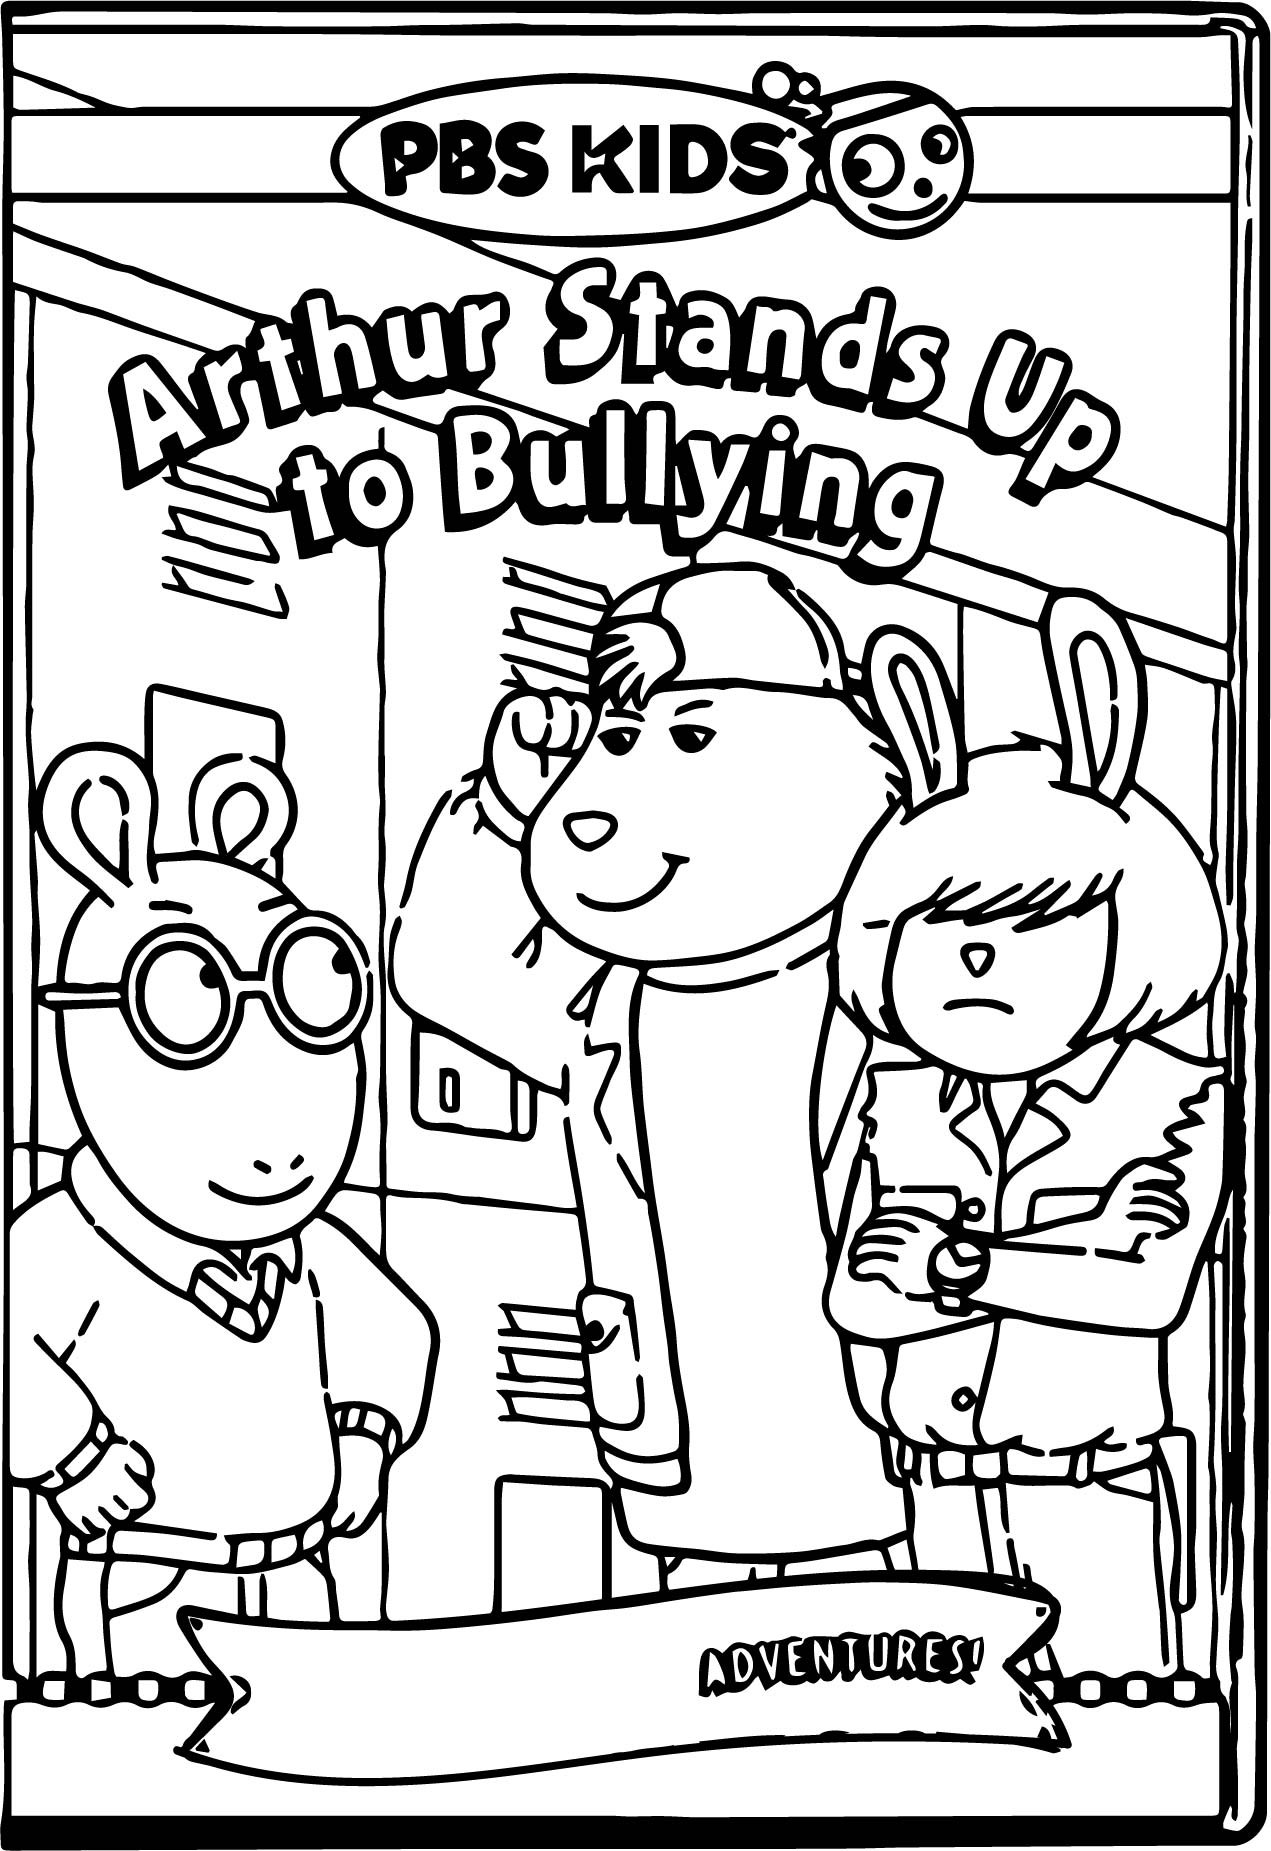 Kids Coloring Book Pages
 Arthur Pbs Kids Coloring Pages